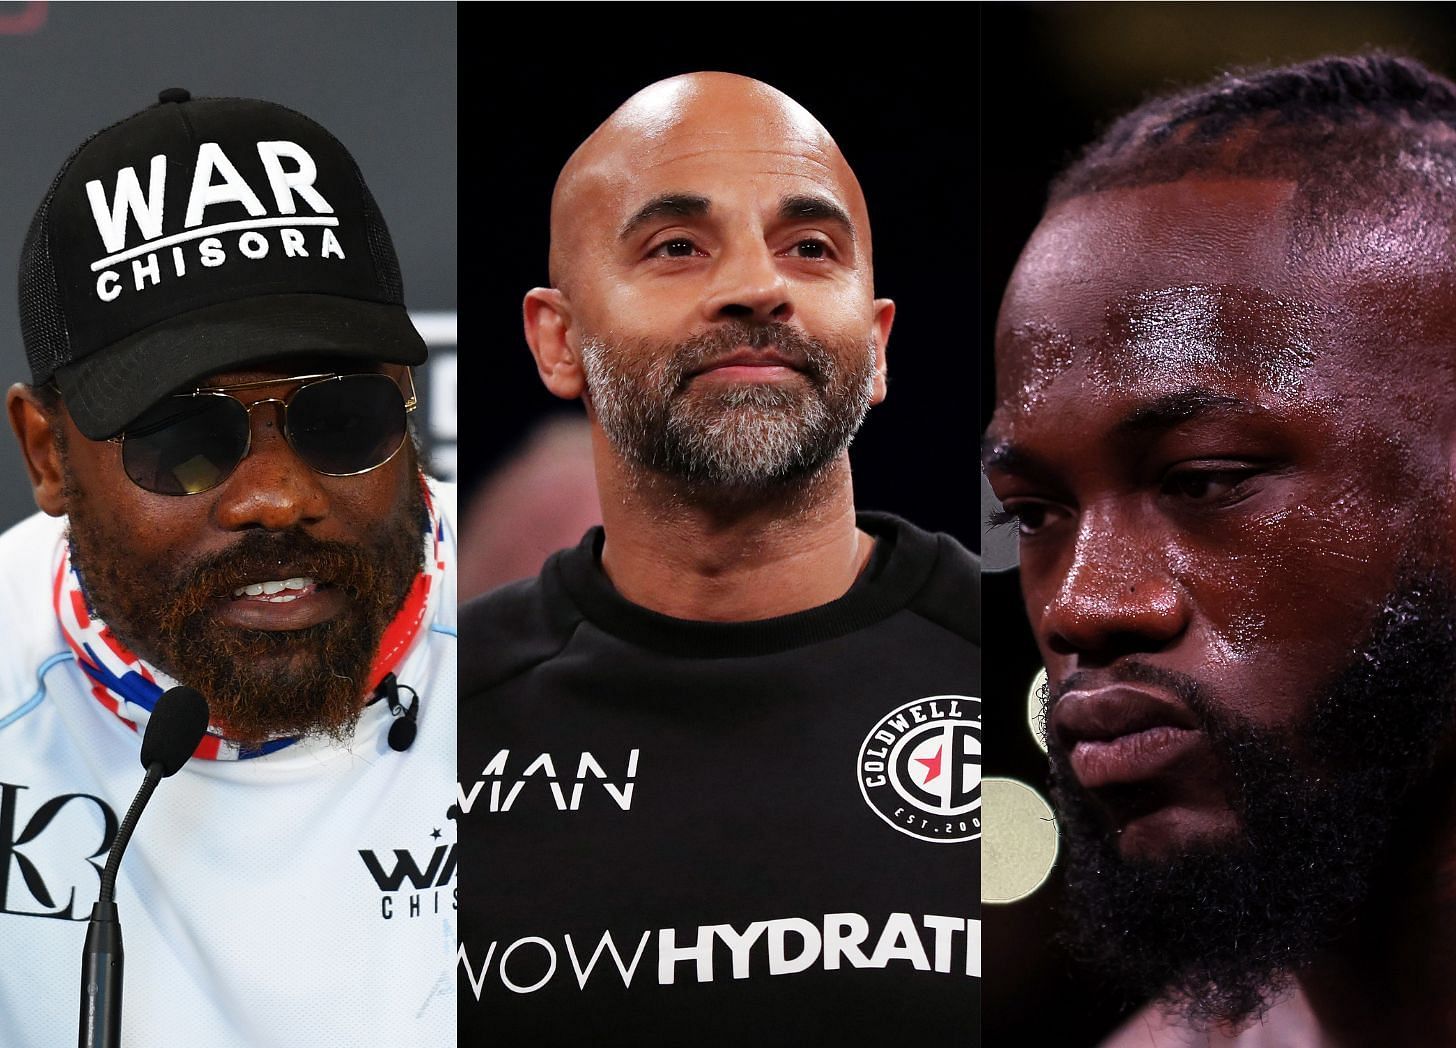 From left to right: Dereck Chisora, Dave Coldwell, Deontay Wilder